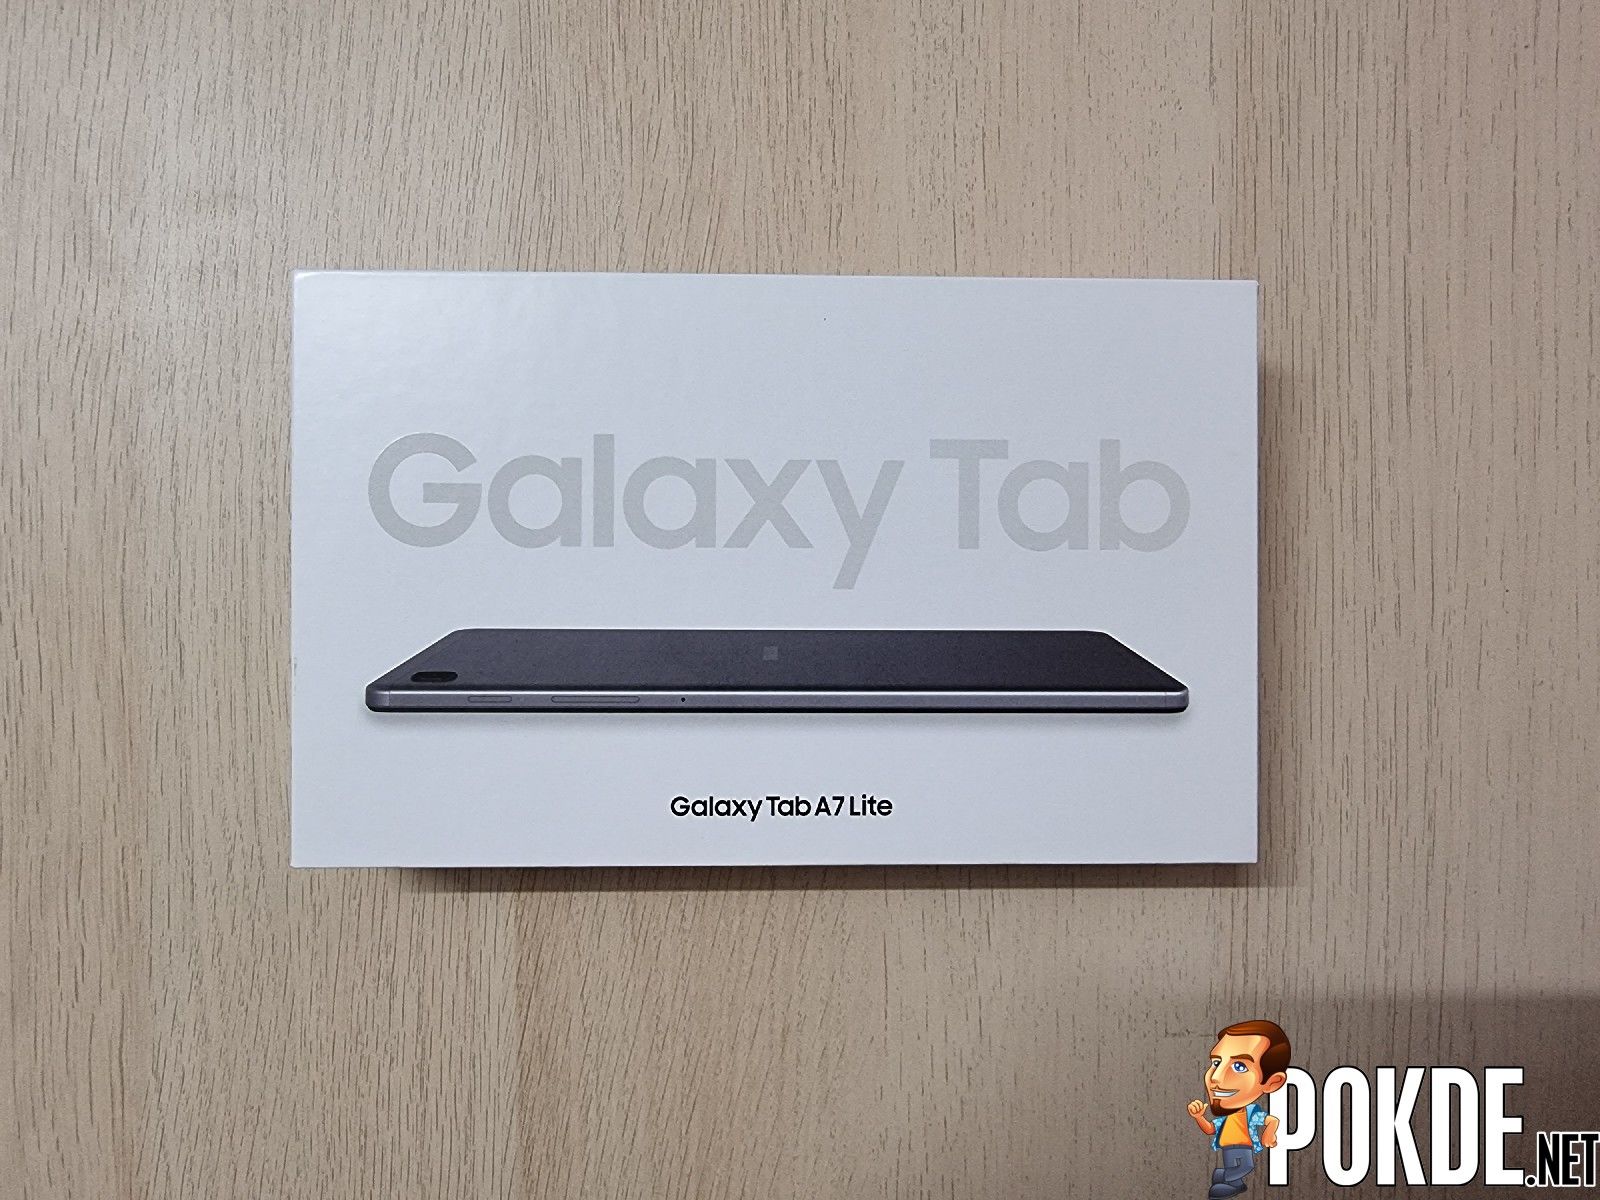 Samsung Galaxy Tab A7 Lite Review - Value-Focused Practicality